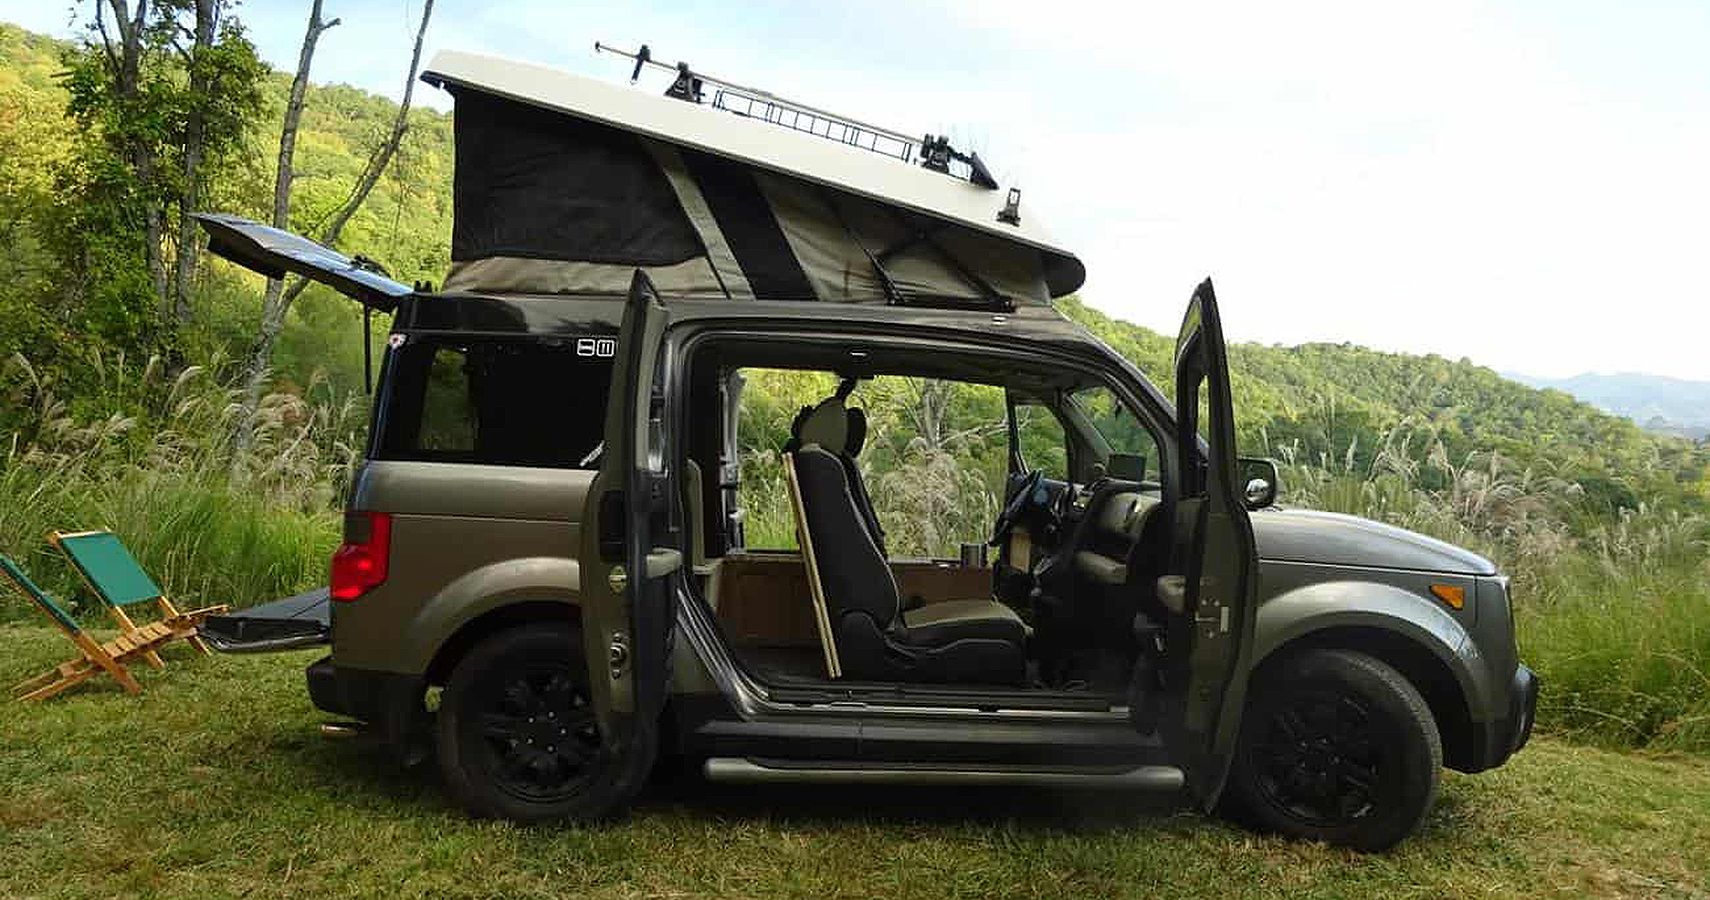 Honda Element in camping mode side view